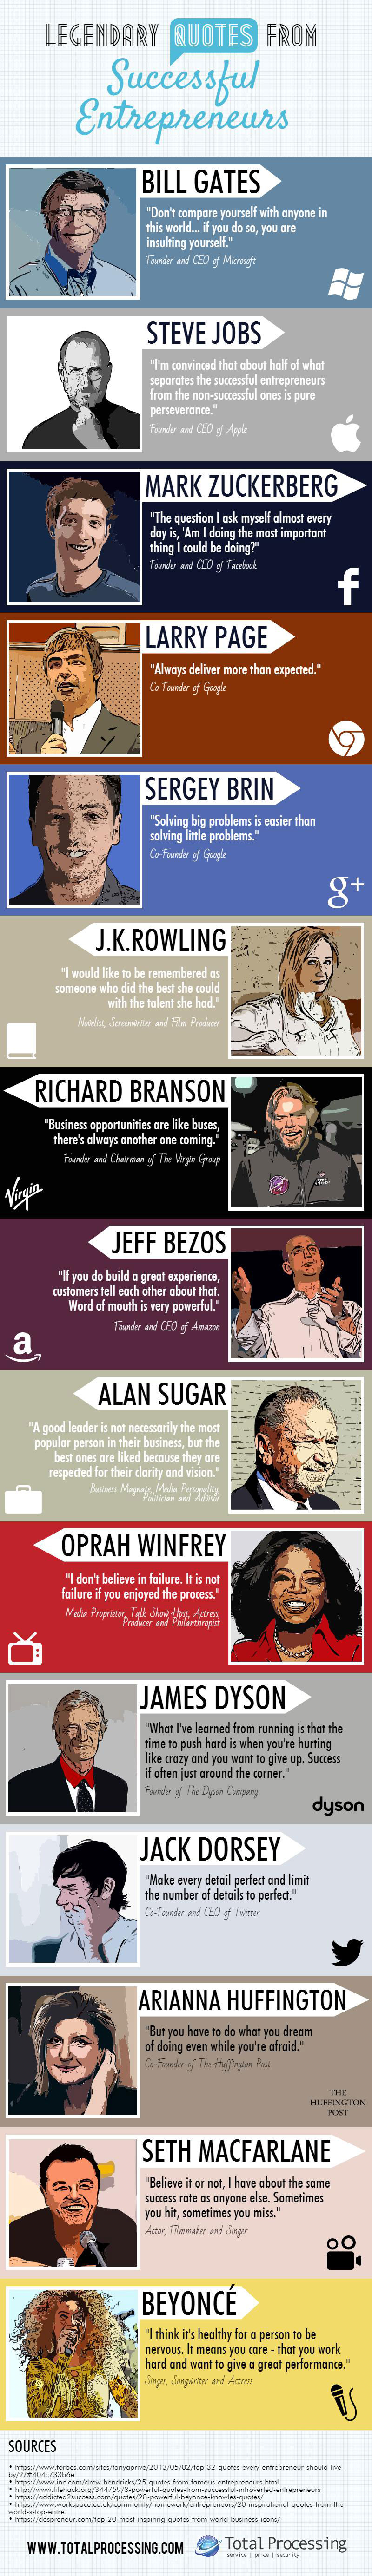 15 Legendary Quotes From Successful Entrepreneurs 